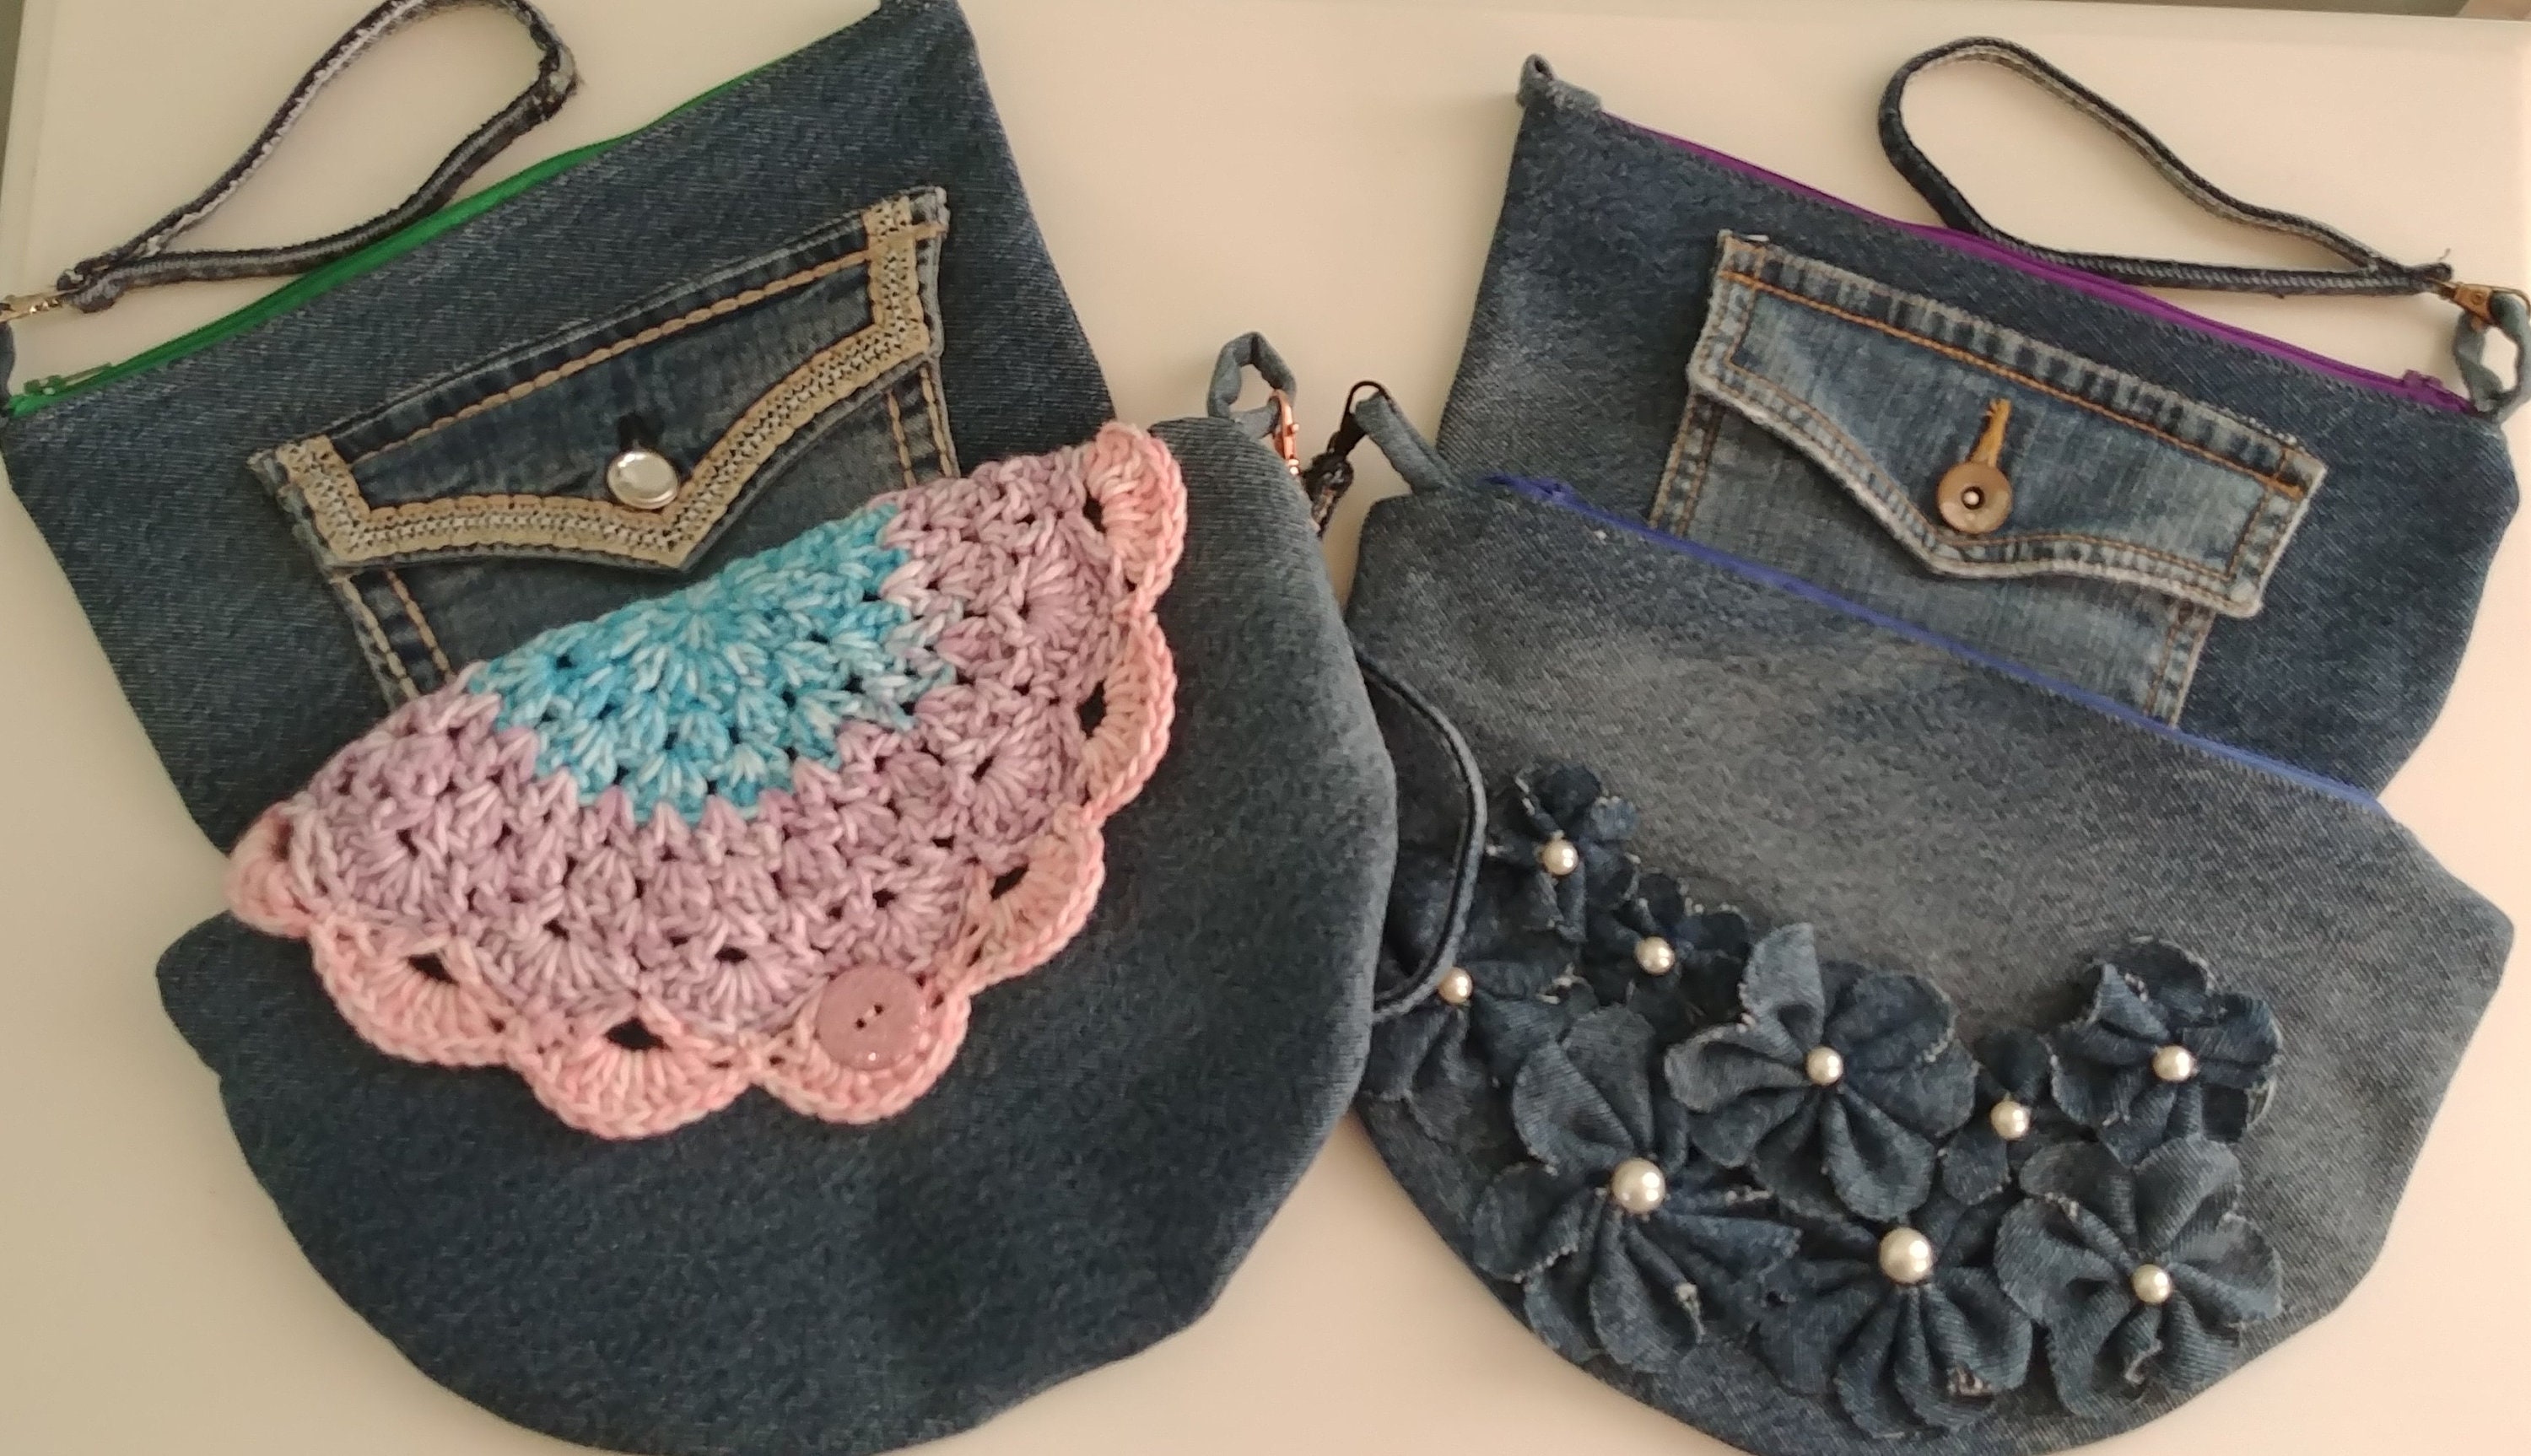 Jean Queen: How to Transform Old Jeans Into a Denim Clutch in About an Hour  - Paper and Stitch